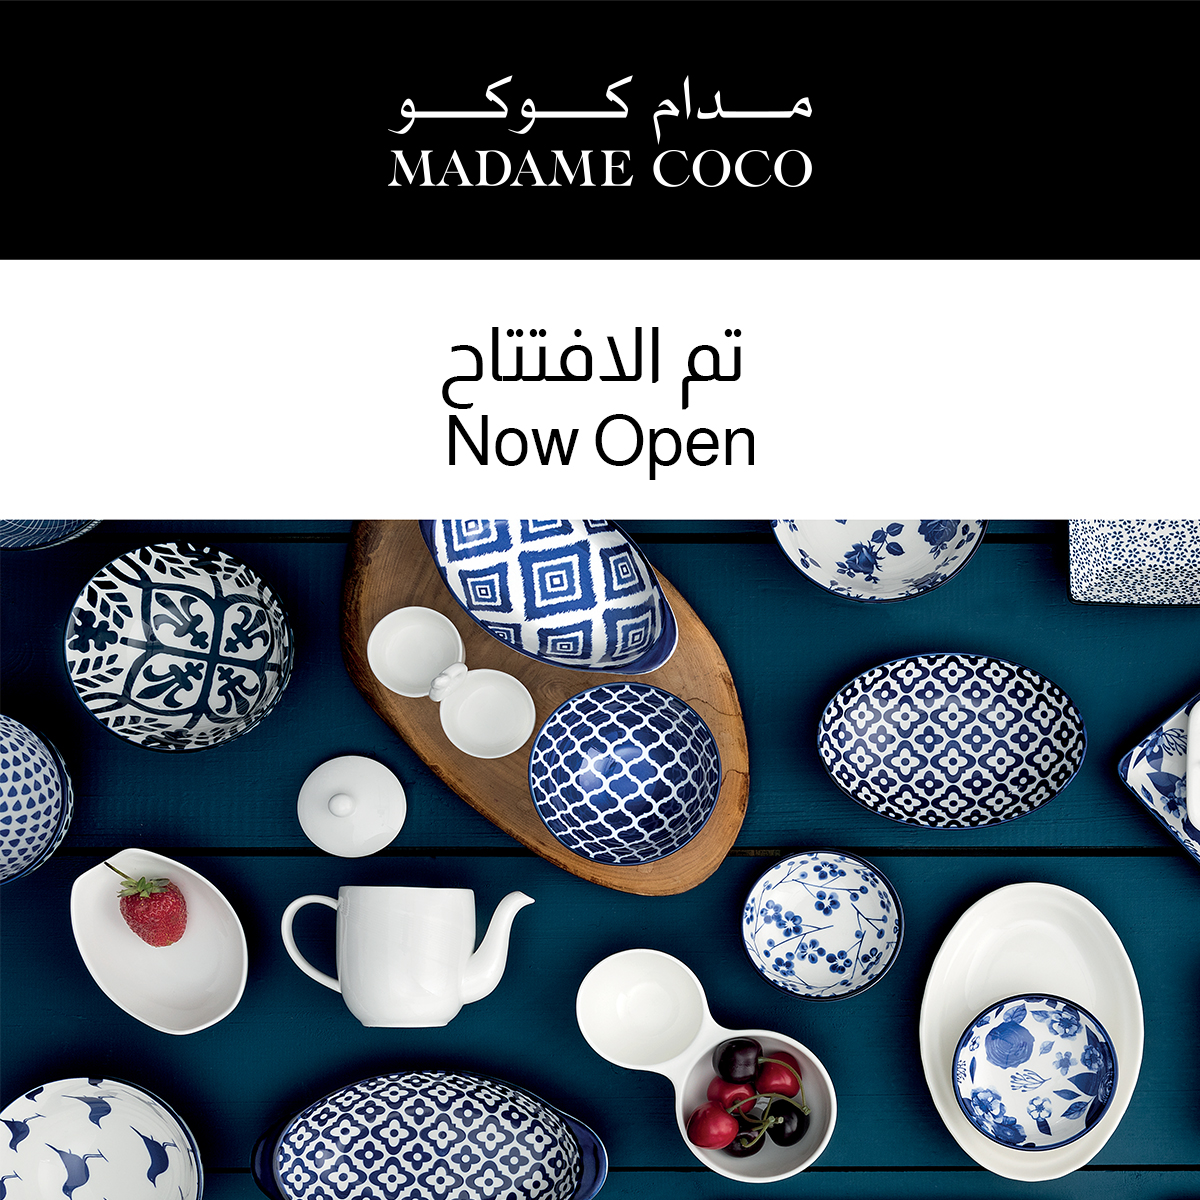 MADAME COCO OPENS FIRST STORE IN QATAR!